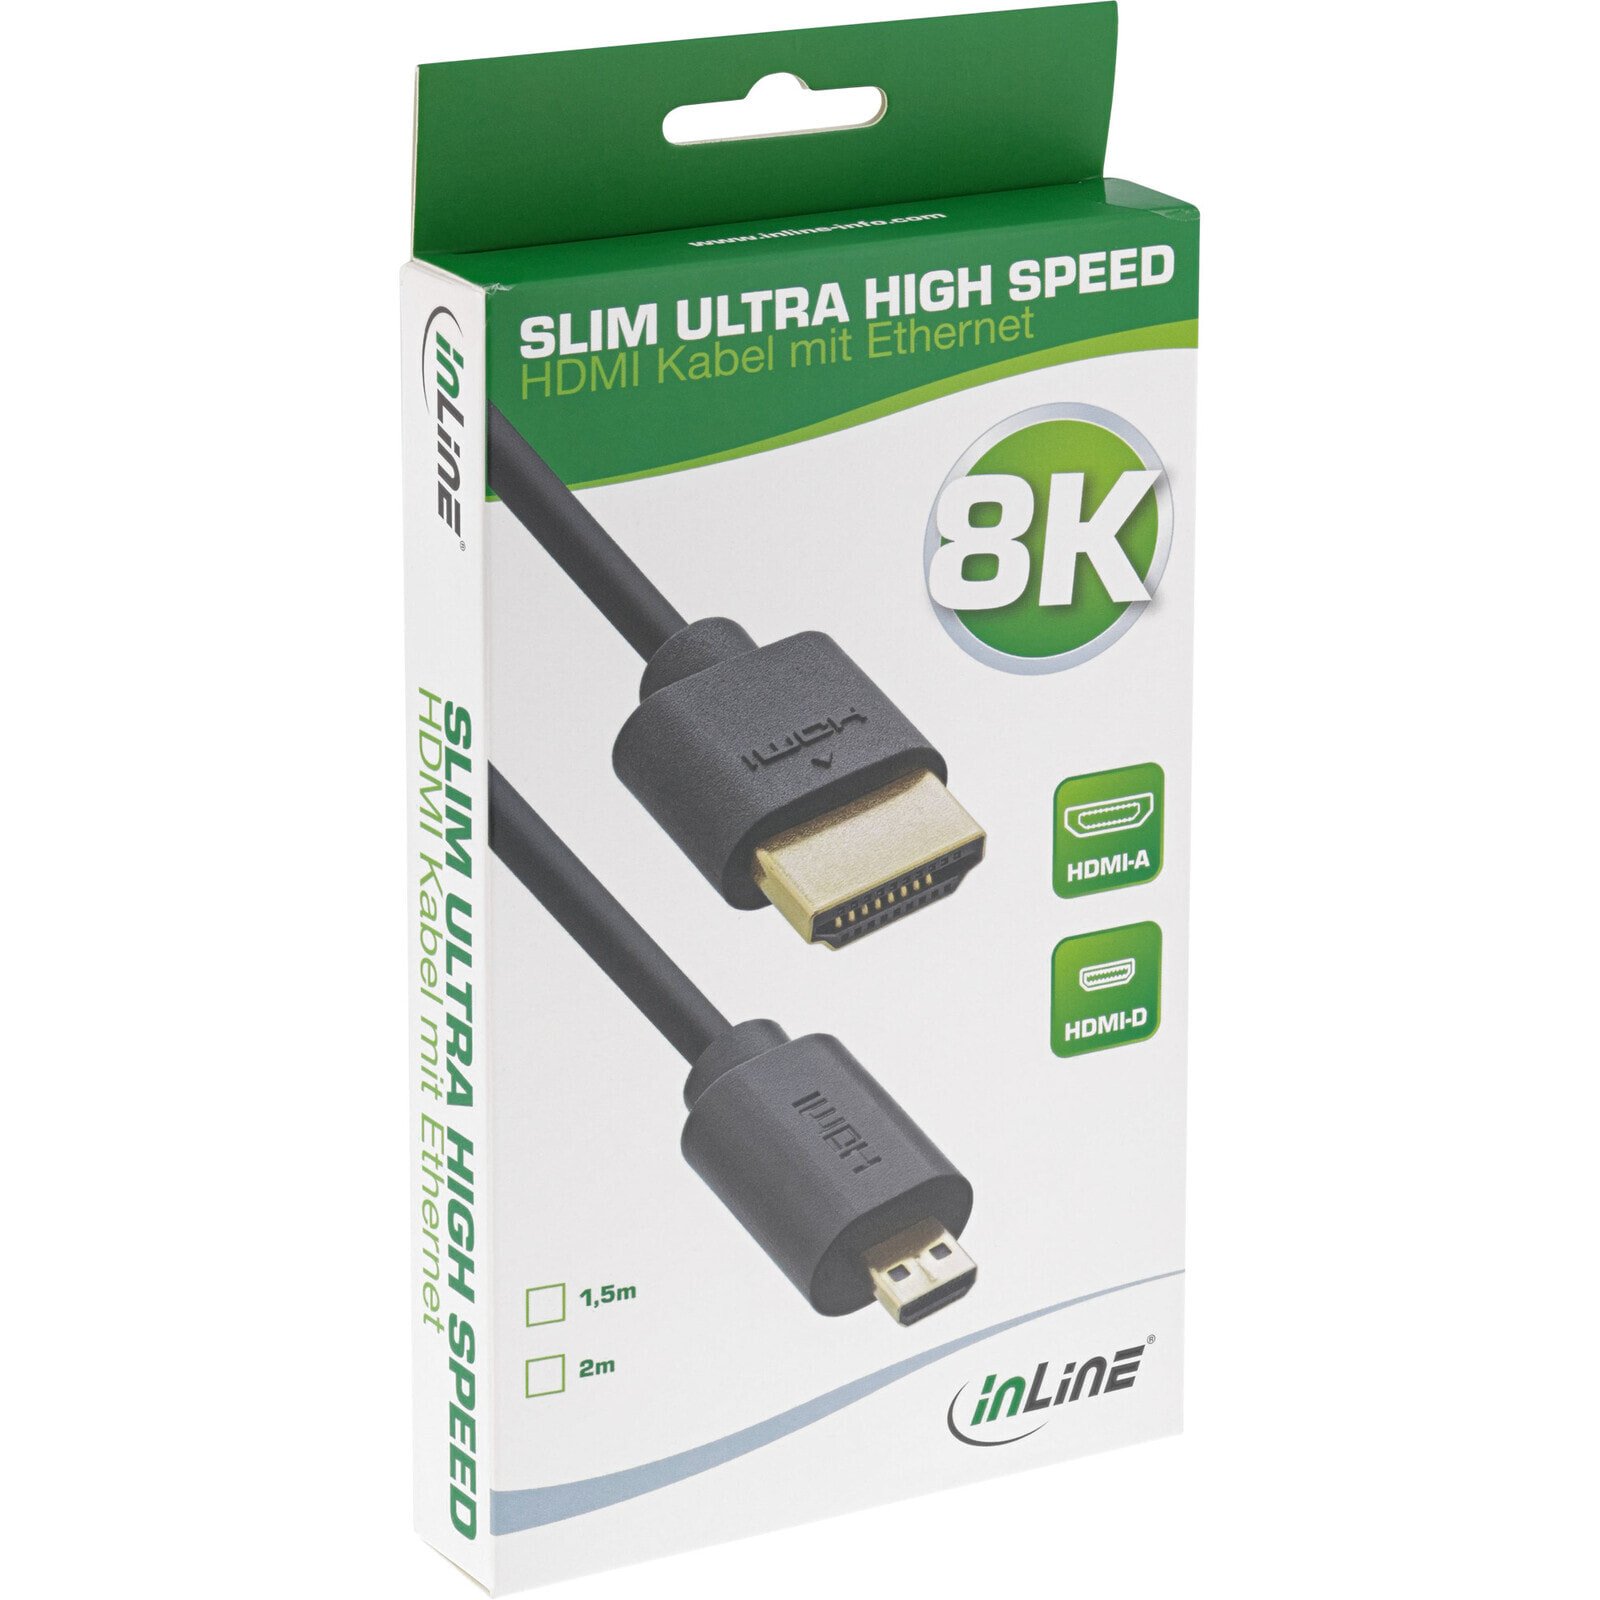 Slim Ultra High Speed HDMI Cable AM/DM 8K4K gold plated black 1.5m